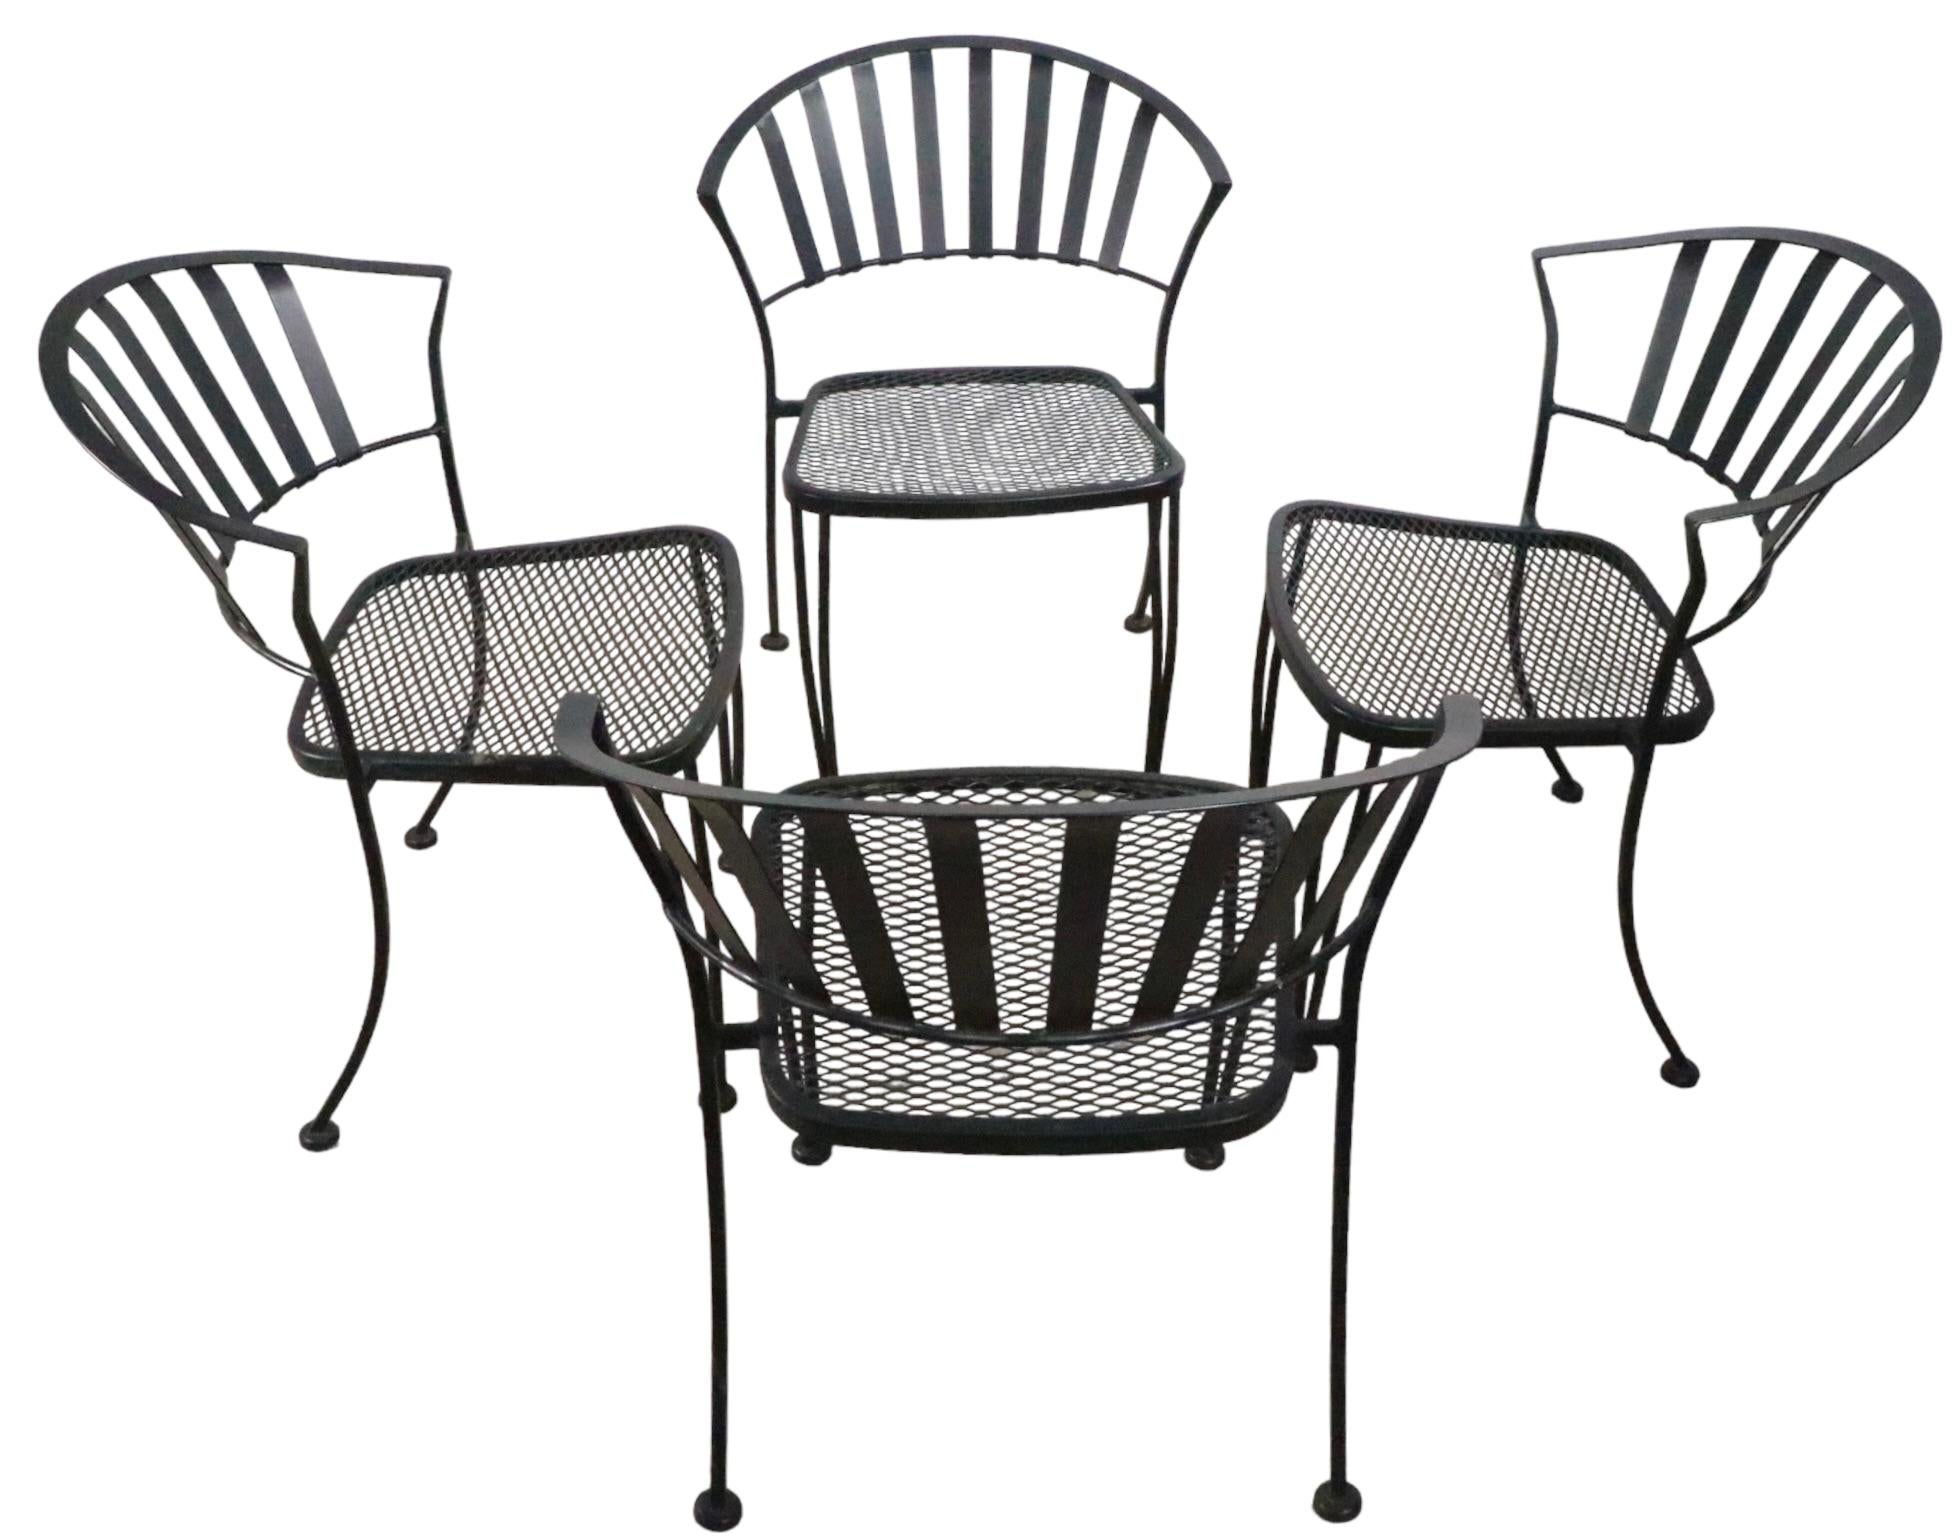 Set of four wrought iron and metal mesh garden, patio, poolside dining chairs. Te chairs have metal strap backs, and metal mesh seats. All four are in very fine, original, clean and ready to use condition, showing only light cosmetic wear, normal